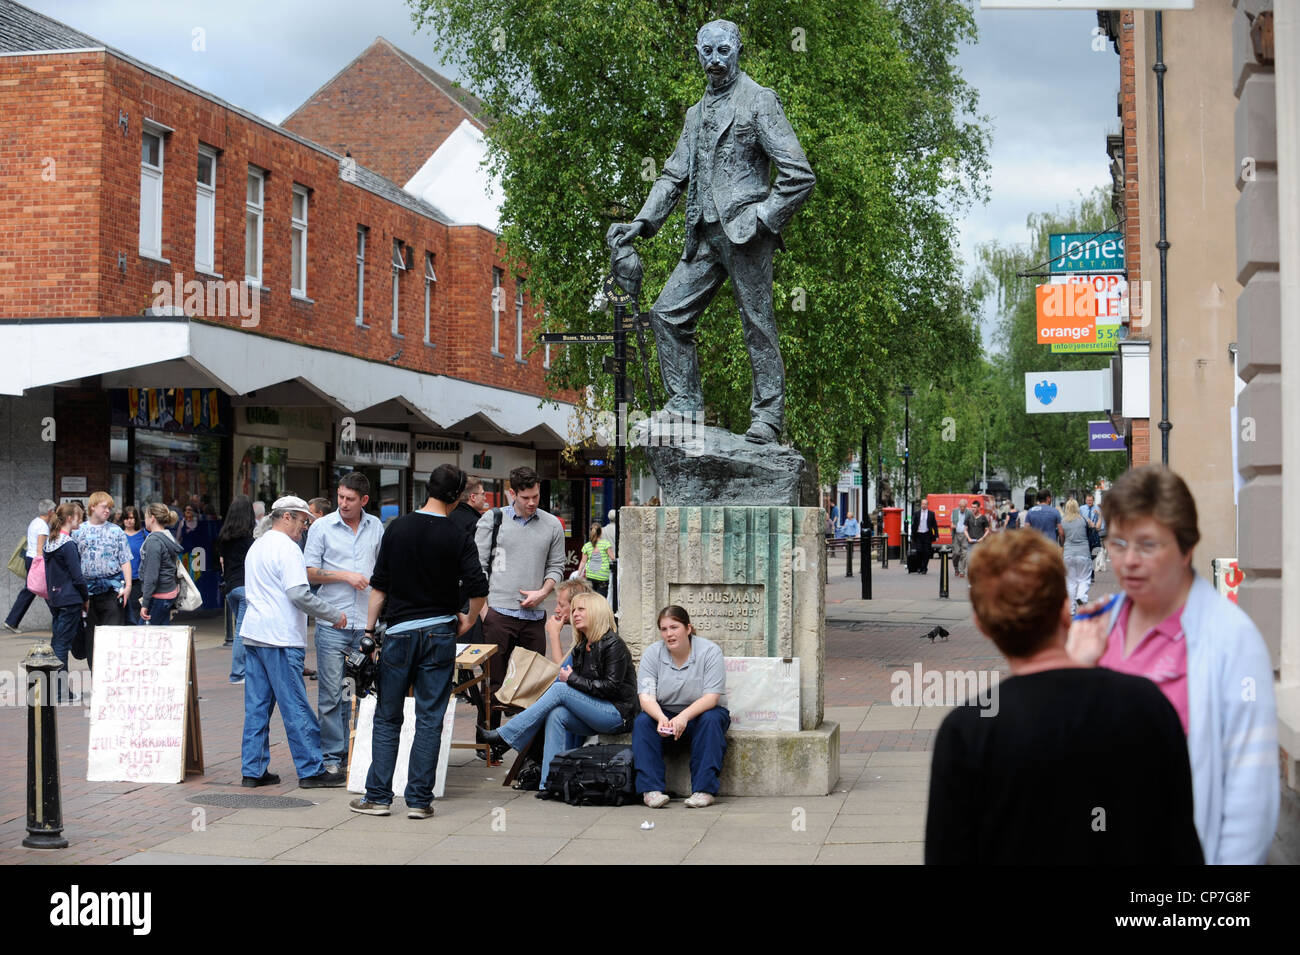 Bromsgrove town centre where a group protest about their local MP Julie Kirkbride during the expenses scandal May 2009 Stock Photo